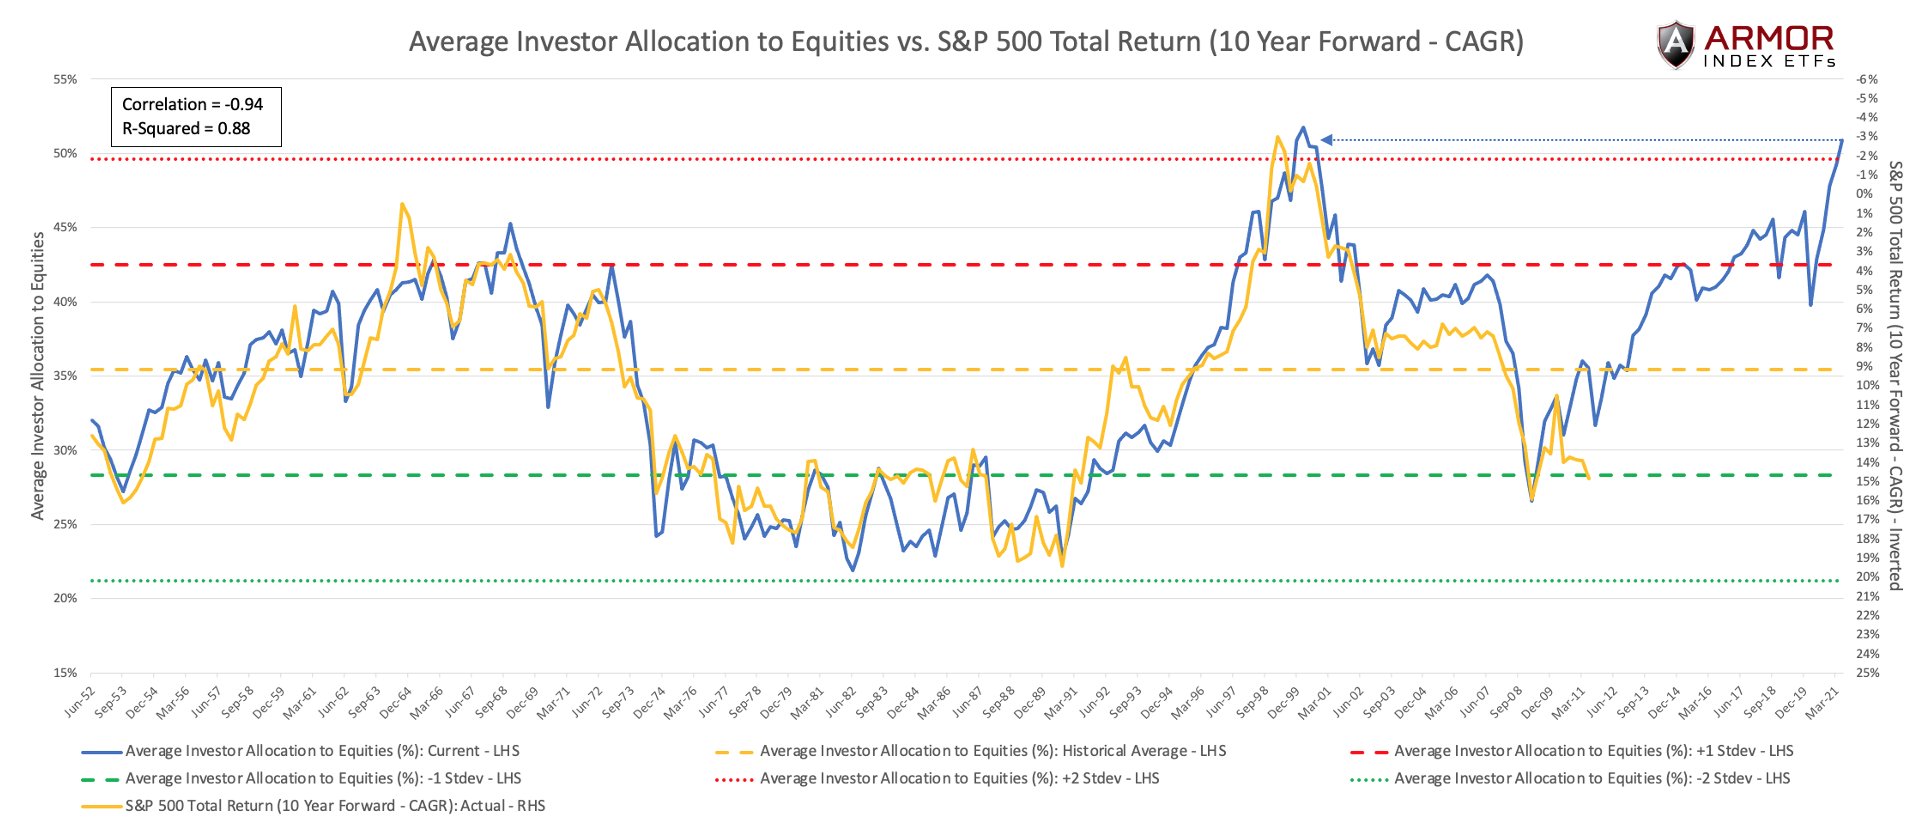 Average Investor Allocations To Equities Vs S&P 500 Total Returns